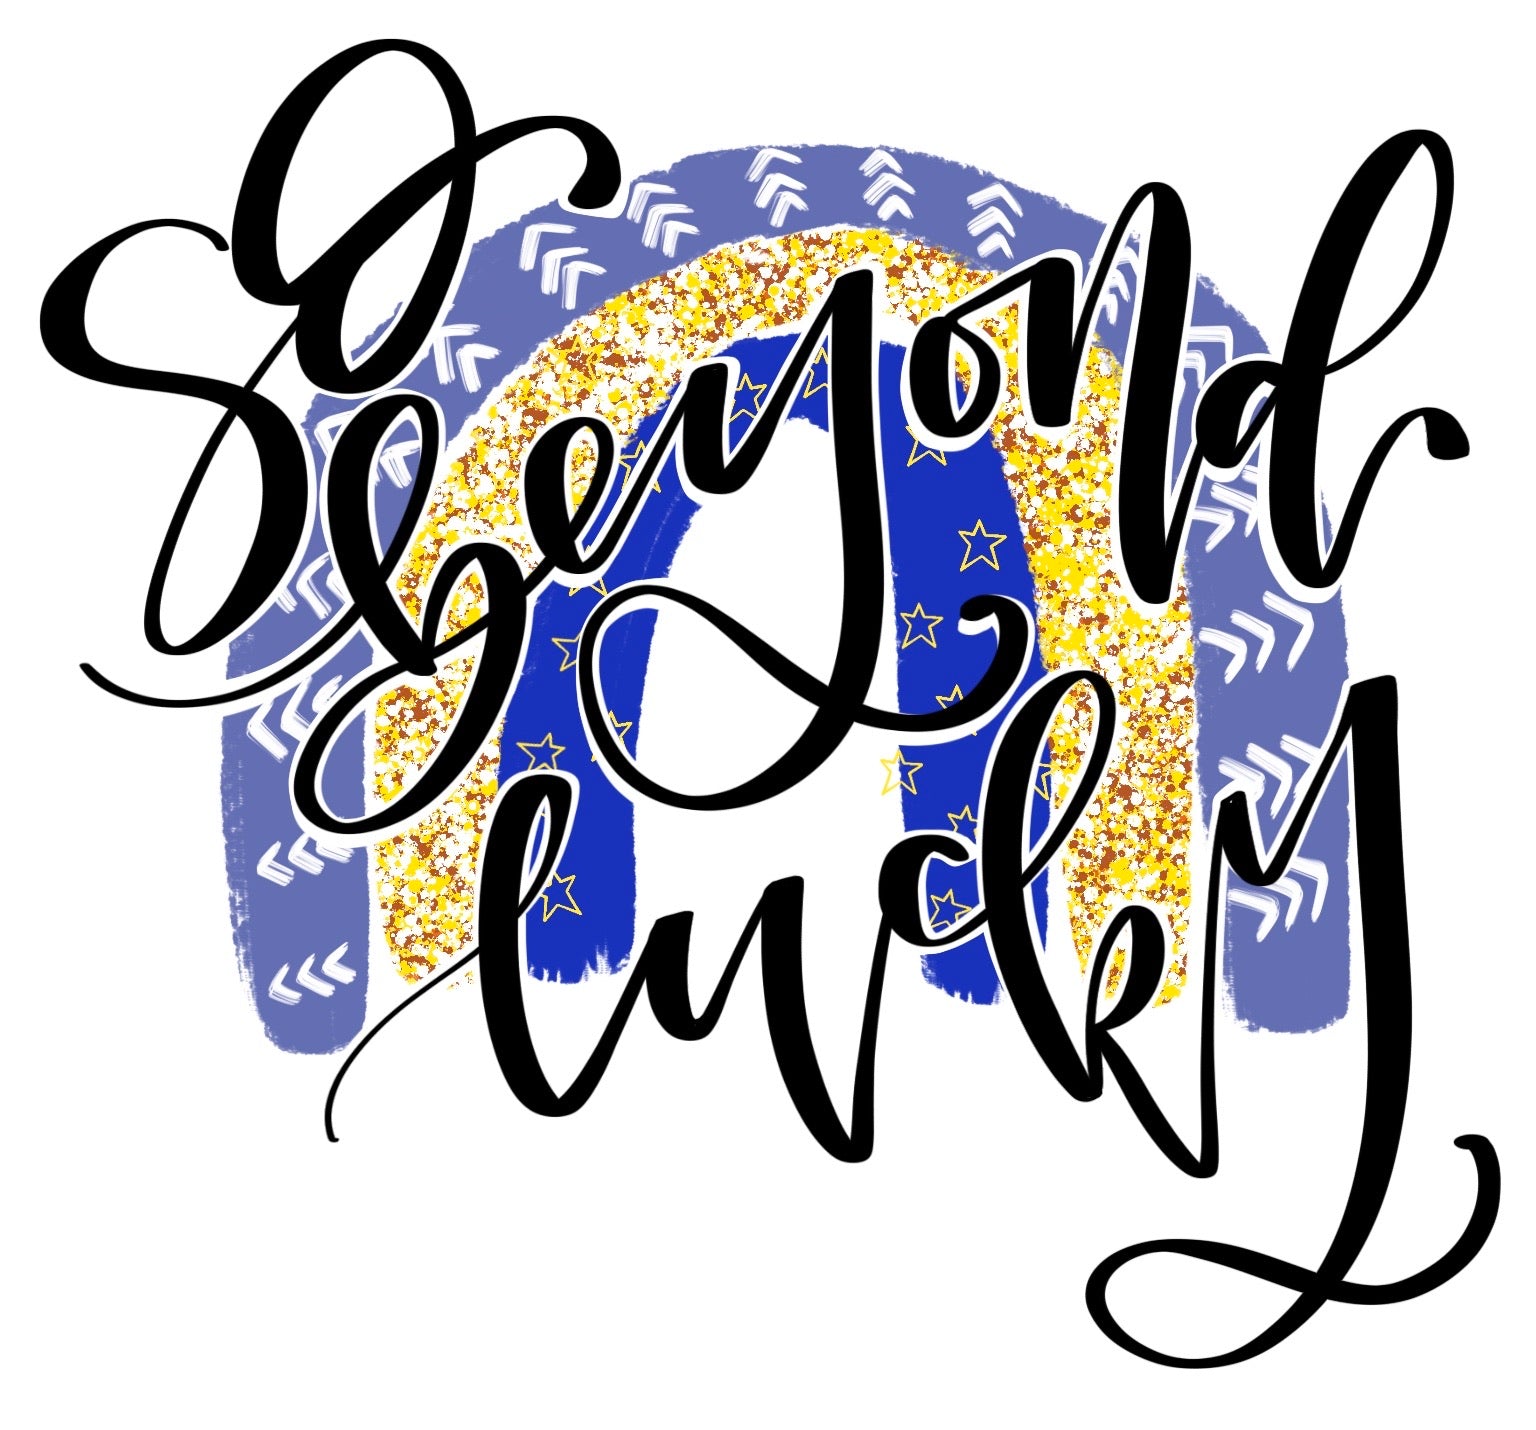 So beyond lucky digital file: Down syndrome fundraiser png file